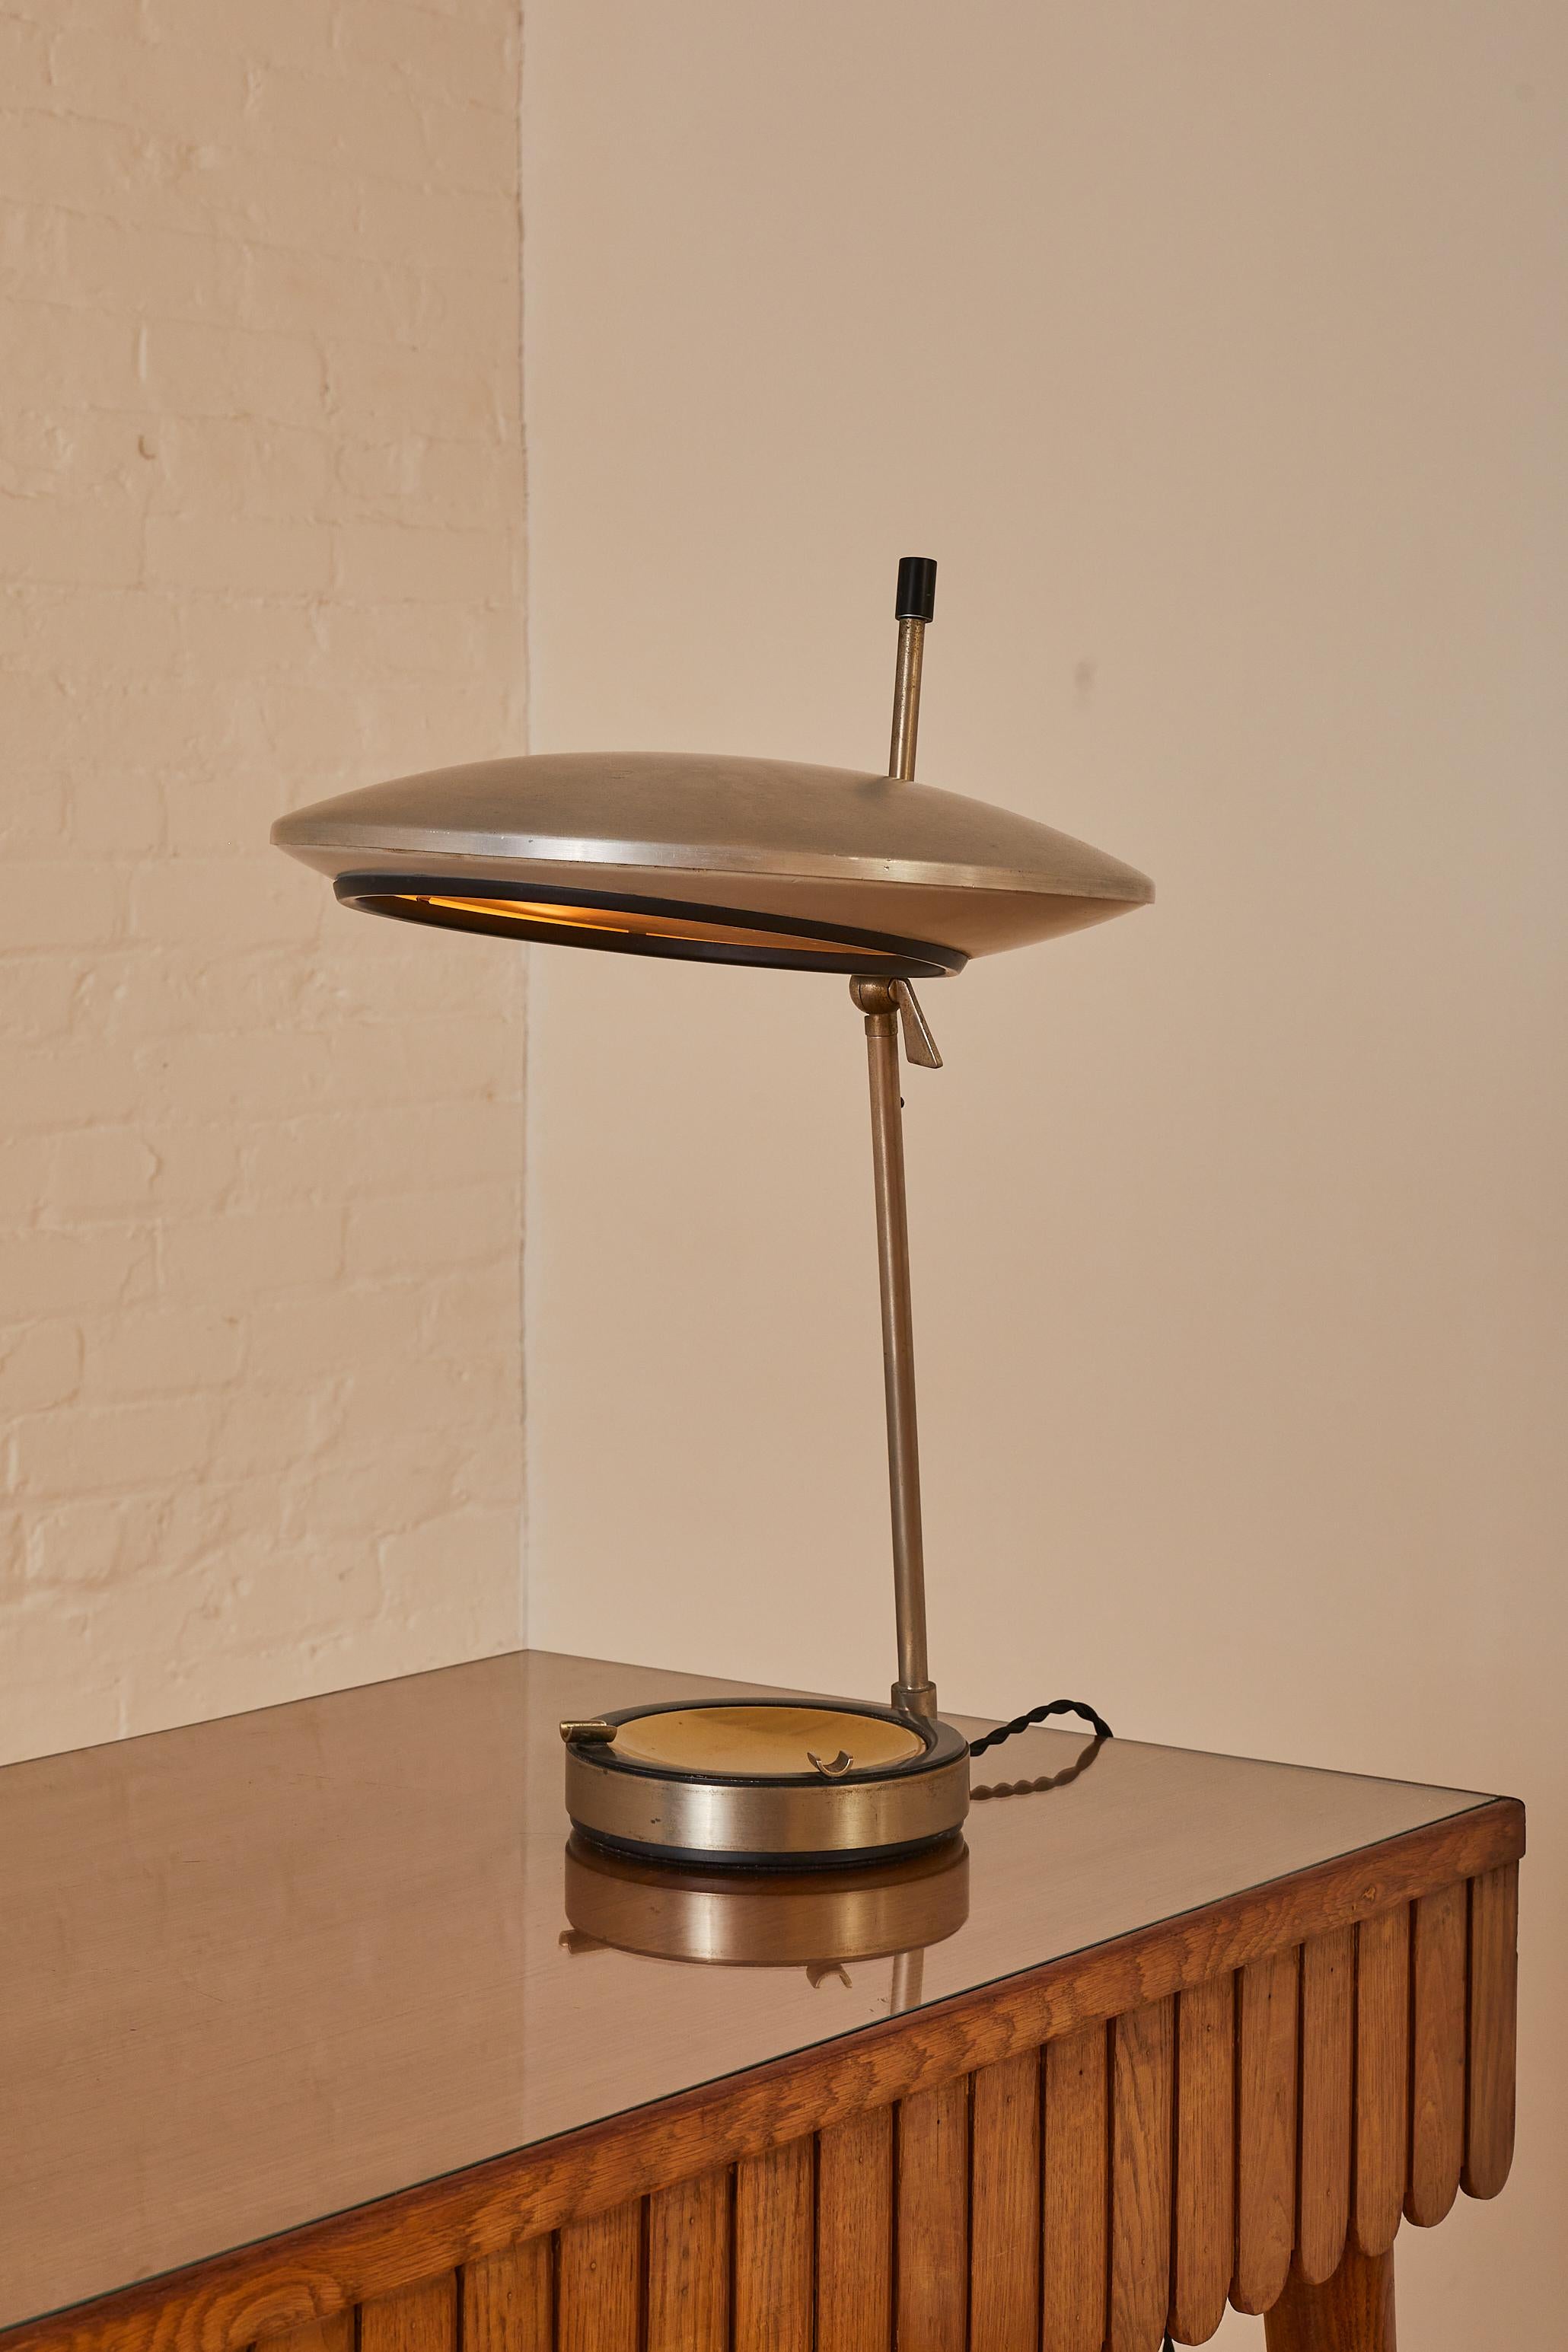 Table Lamp by Oscar Torlasco (Model 567) for Lumi Milano. The lampshade can be adjusted in several directions.

